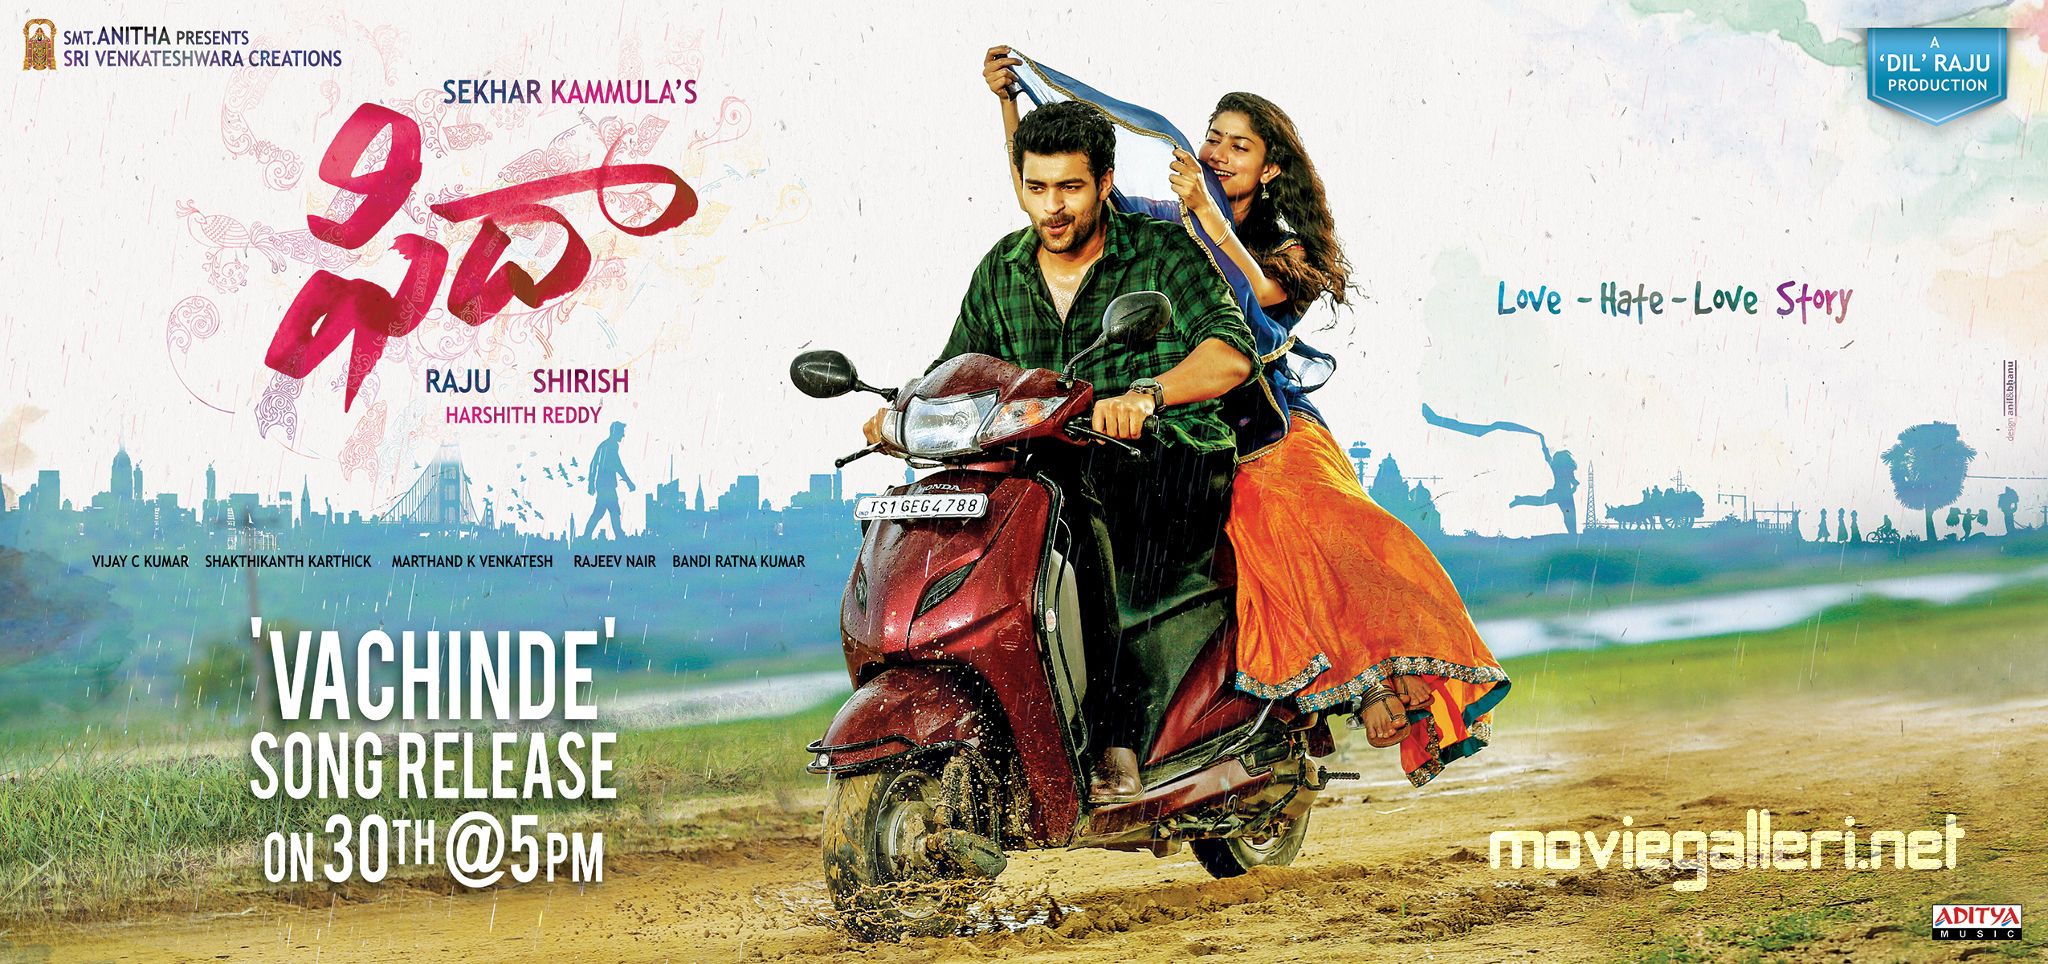 Fidaa Movie Vachinde Song Release Wallpaper. New Movie Posters